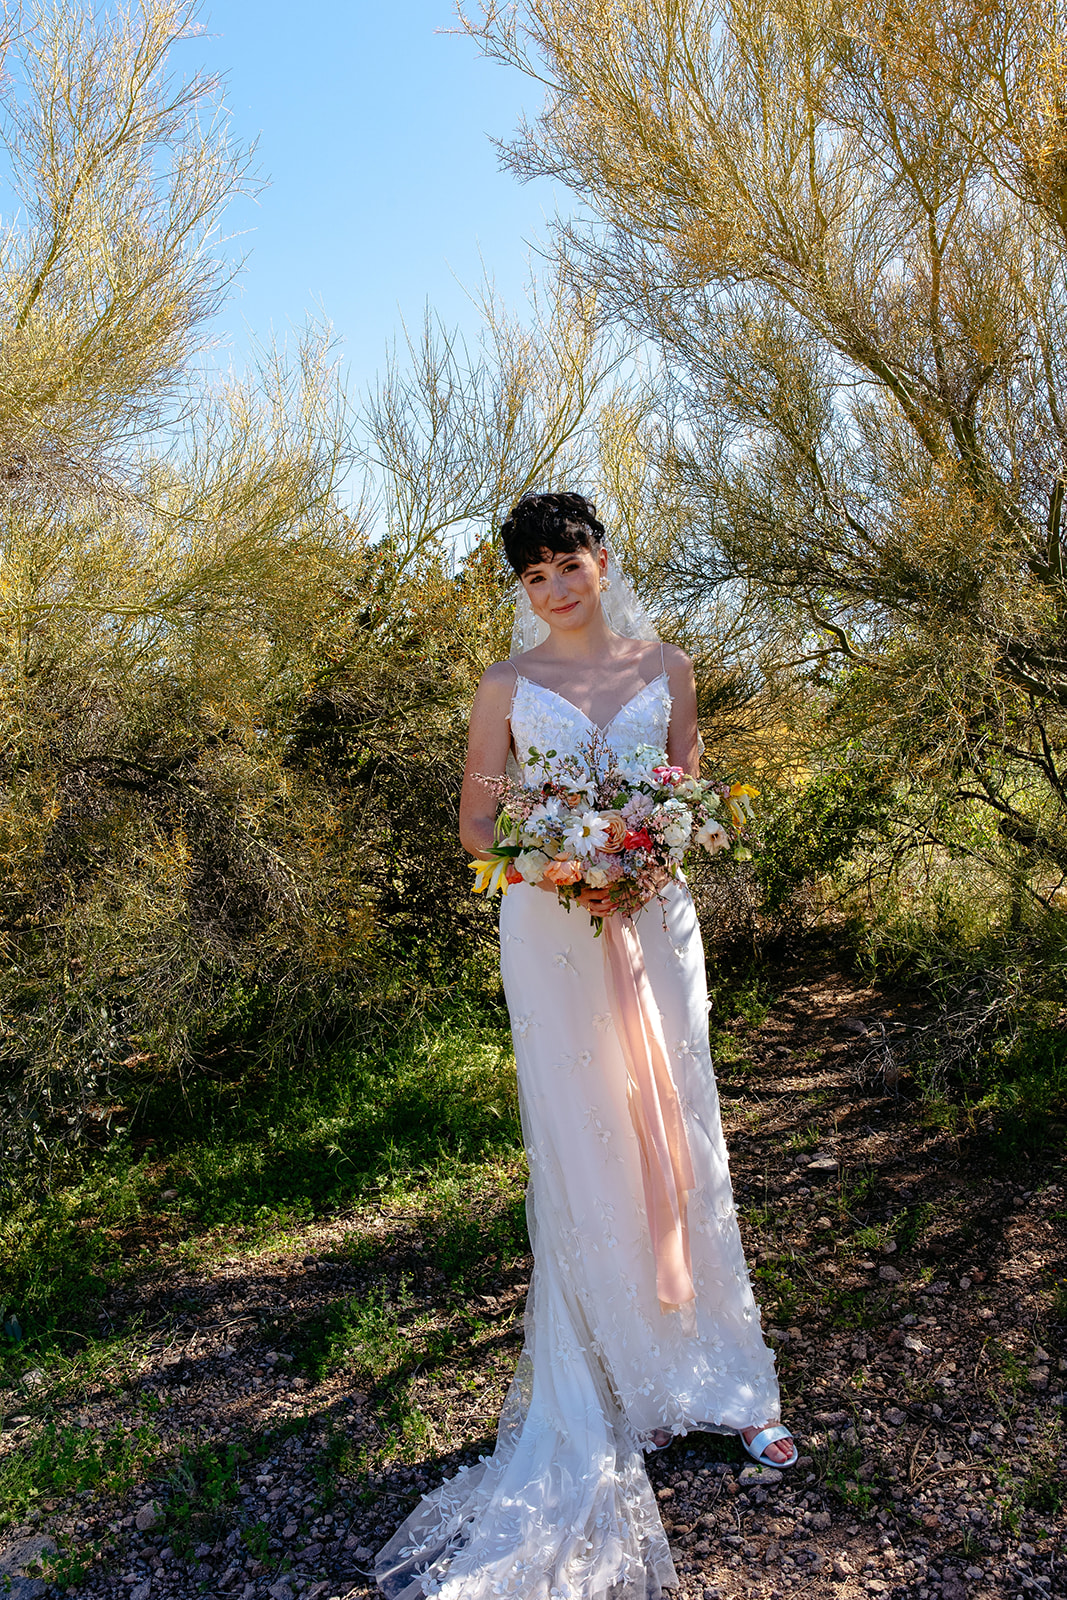 A woman in a white wedding dress holds a bouquet of flowers while standing outdoors among trees and shrubs.